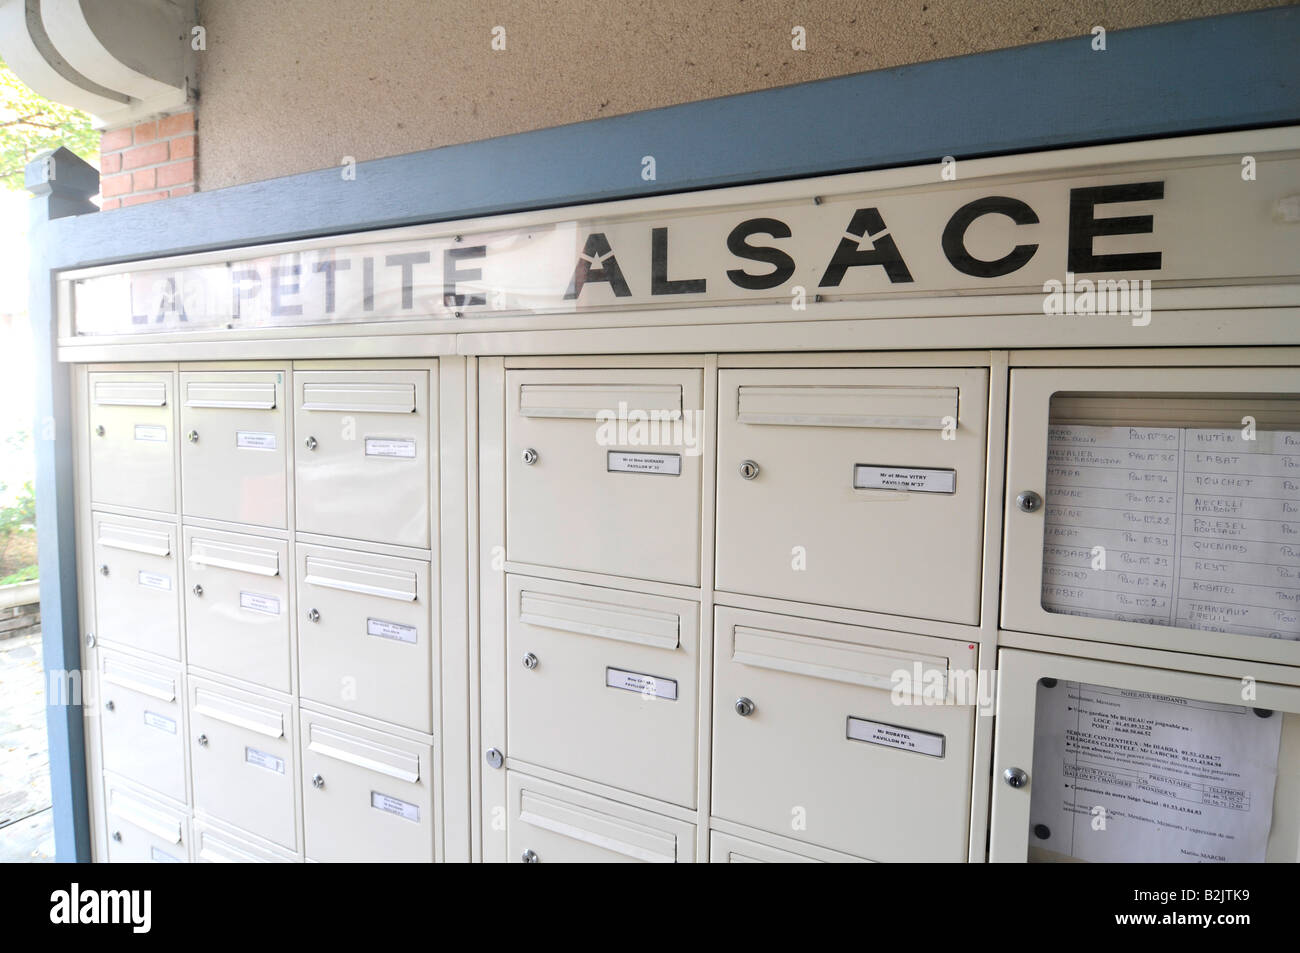 Mail boxes in one the nicest 'HLM' (government subsidised public housing), named the 'Petite Alsace' in Paris, France. Stock Photo